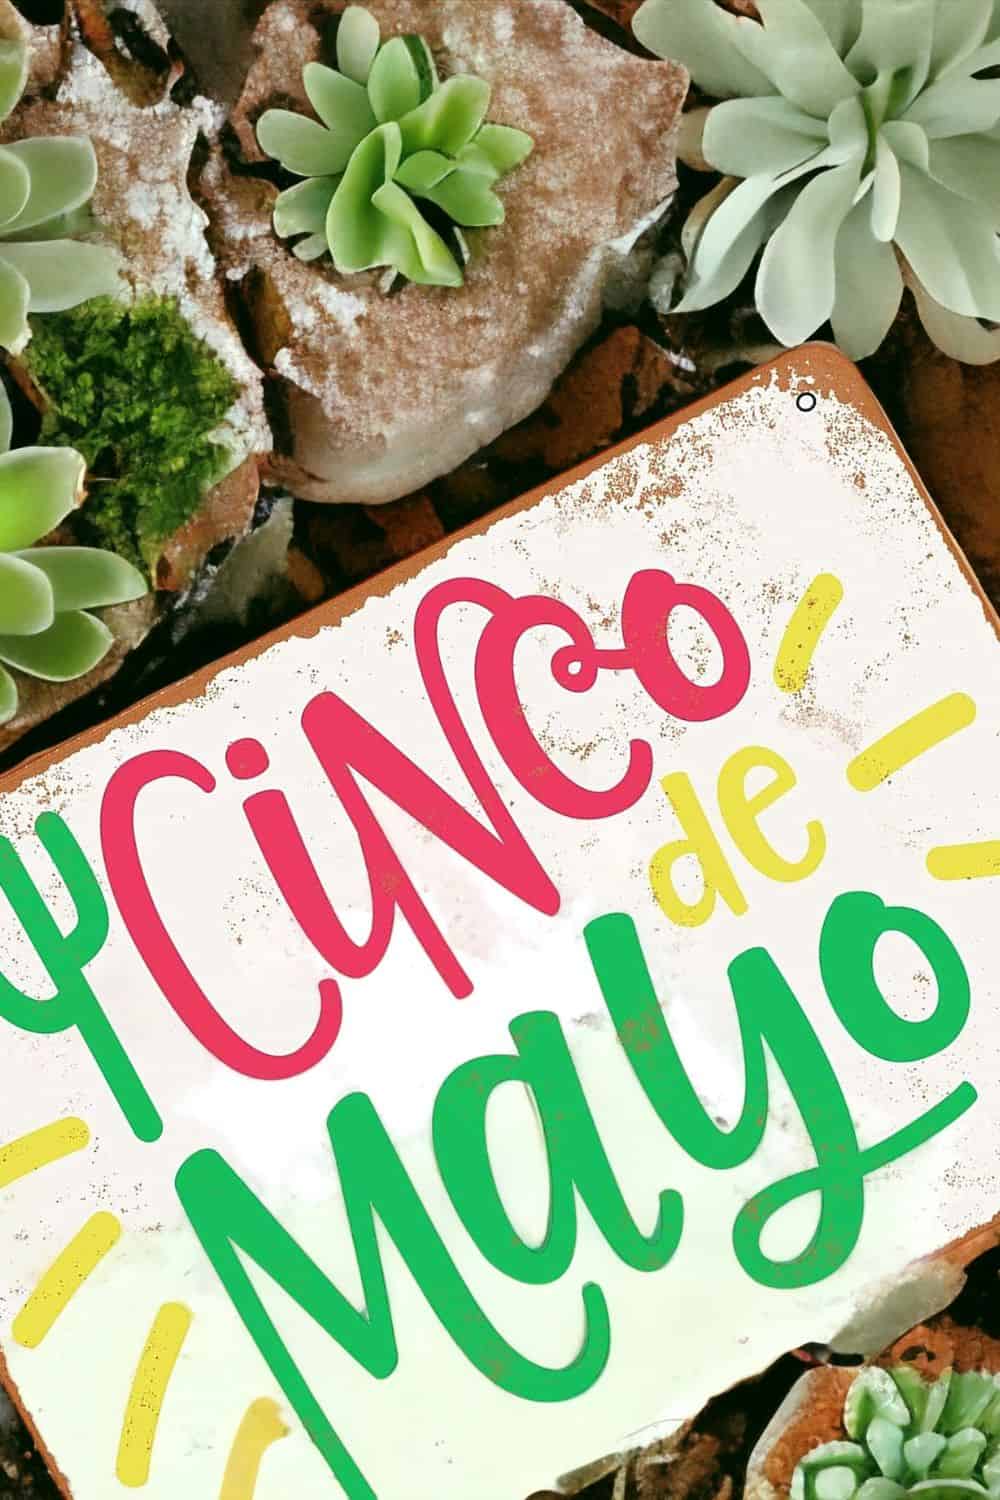 sign that reads "cinco de mayo" on a background of cacti